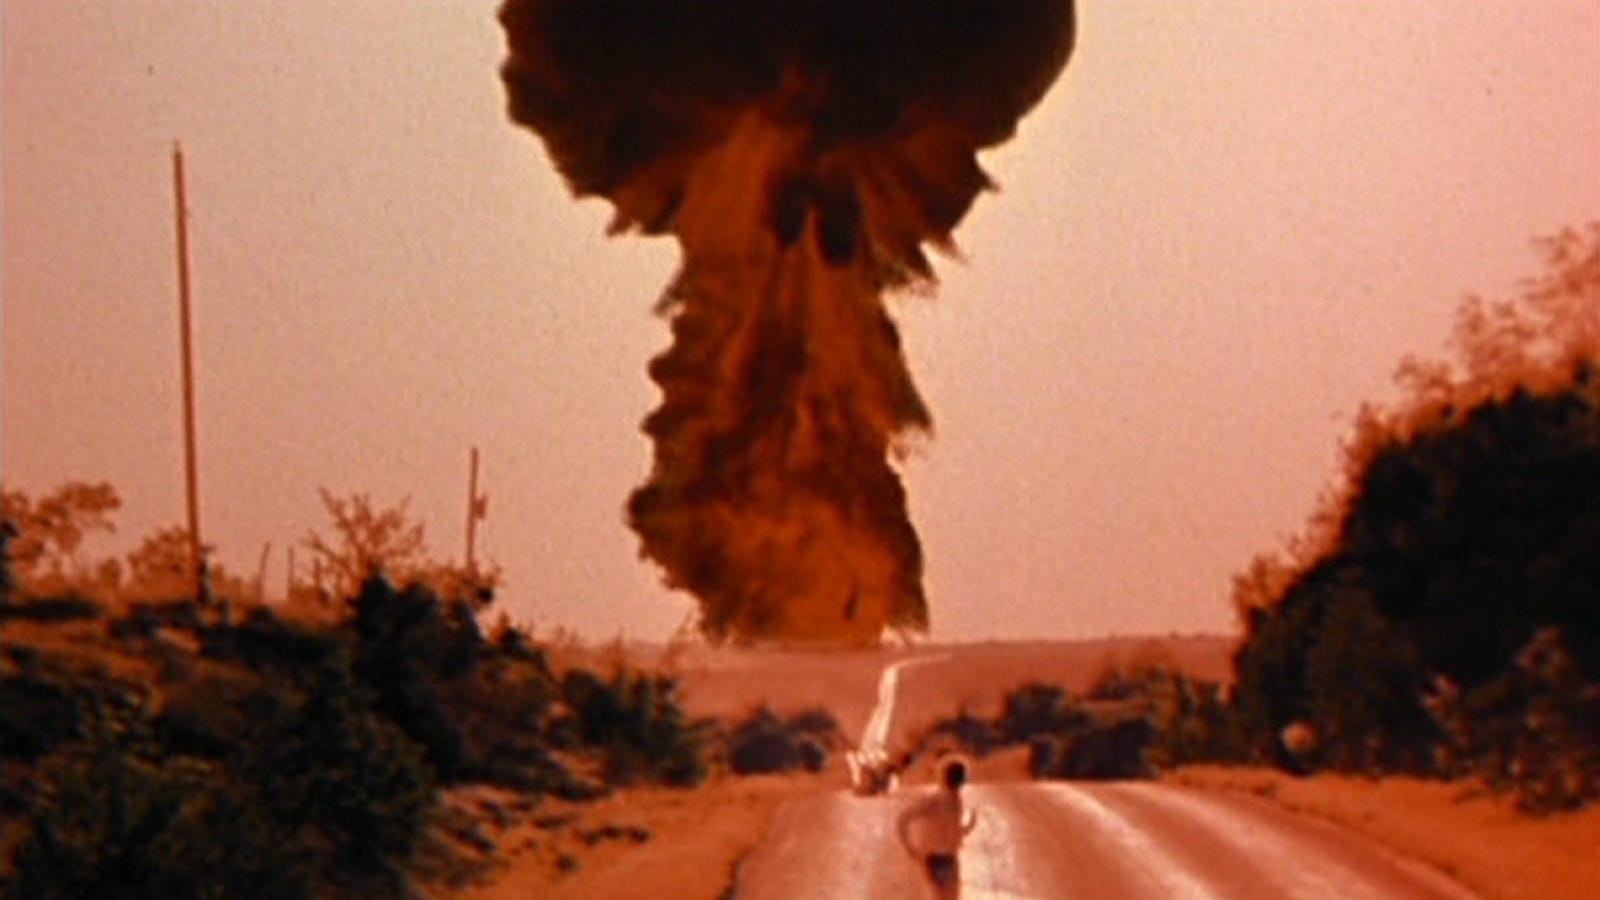 You Can Soon Relive Your Childhood Fears of The Day After's Nuclear War